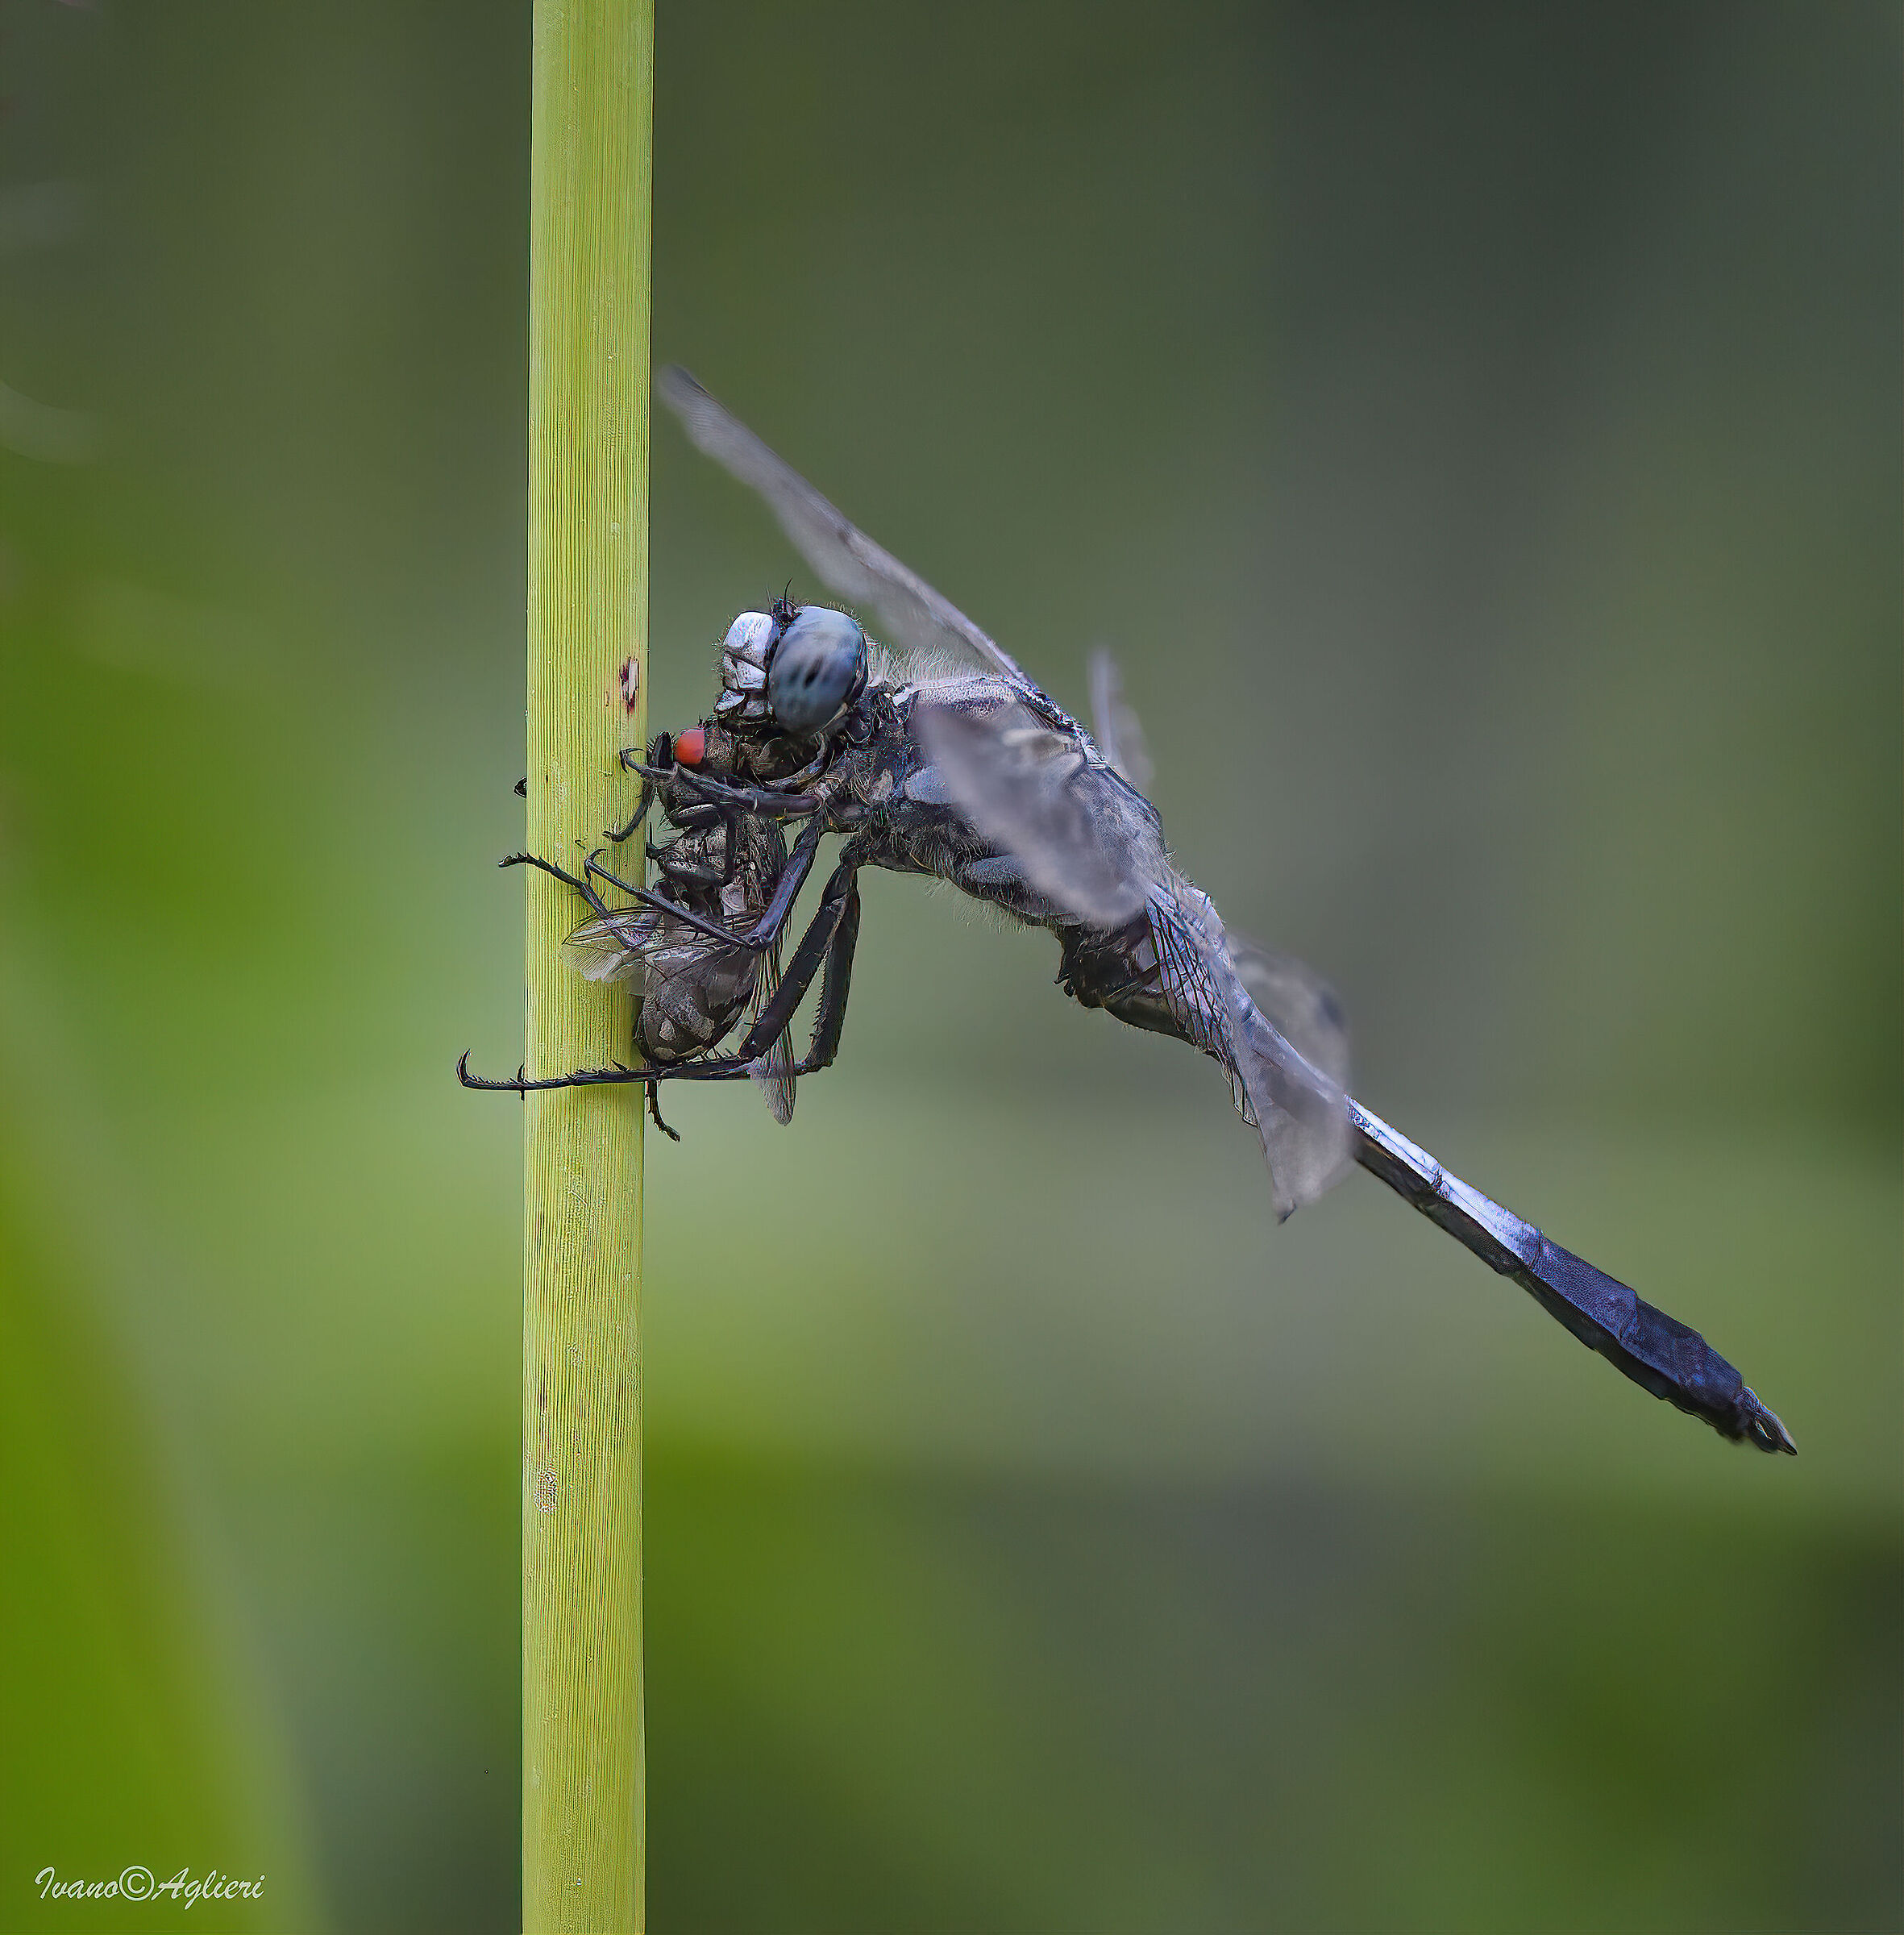 the dragonfly's meal...